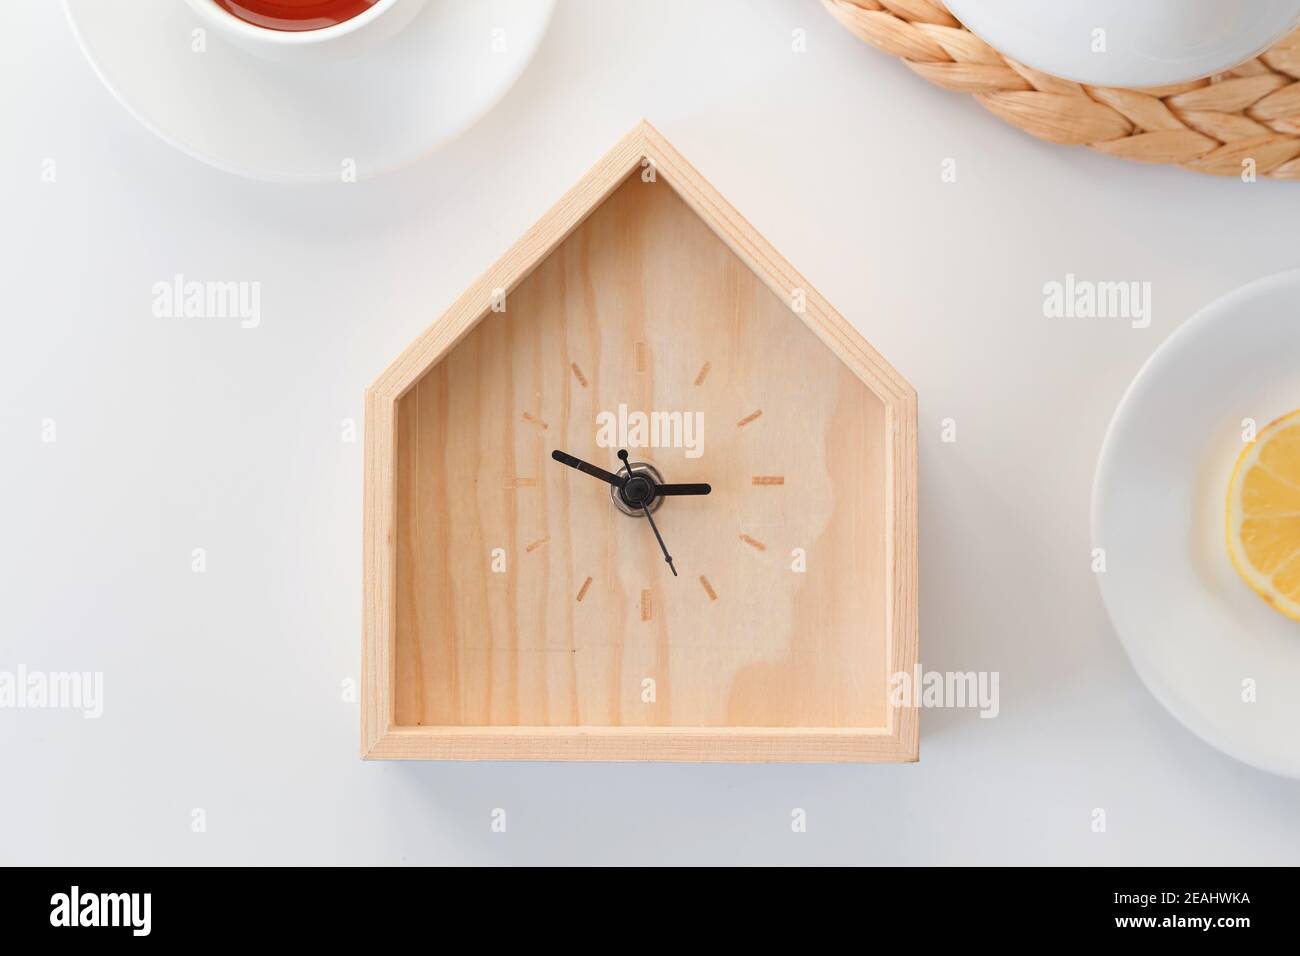 Dinner time. Wooden clock in the shape of house isolated on white background. Minimal concept. Flat lay. Top view. Stock Photo